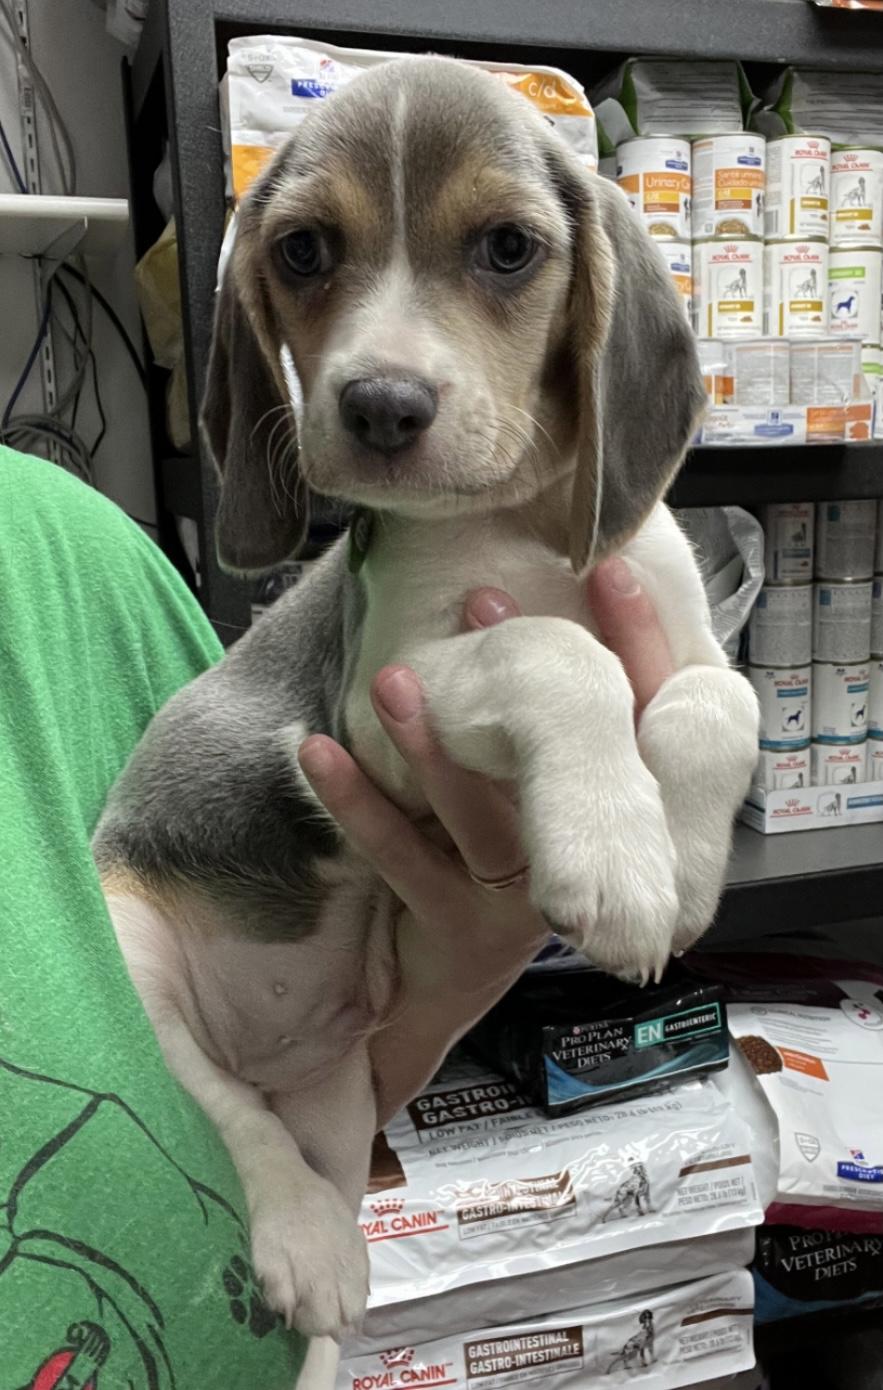 A Beagle puppy is held in one arm by someone wearing a green shirt.